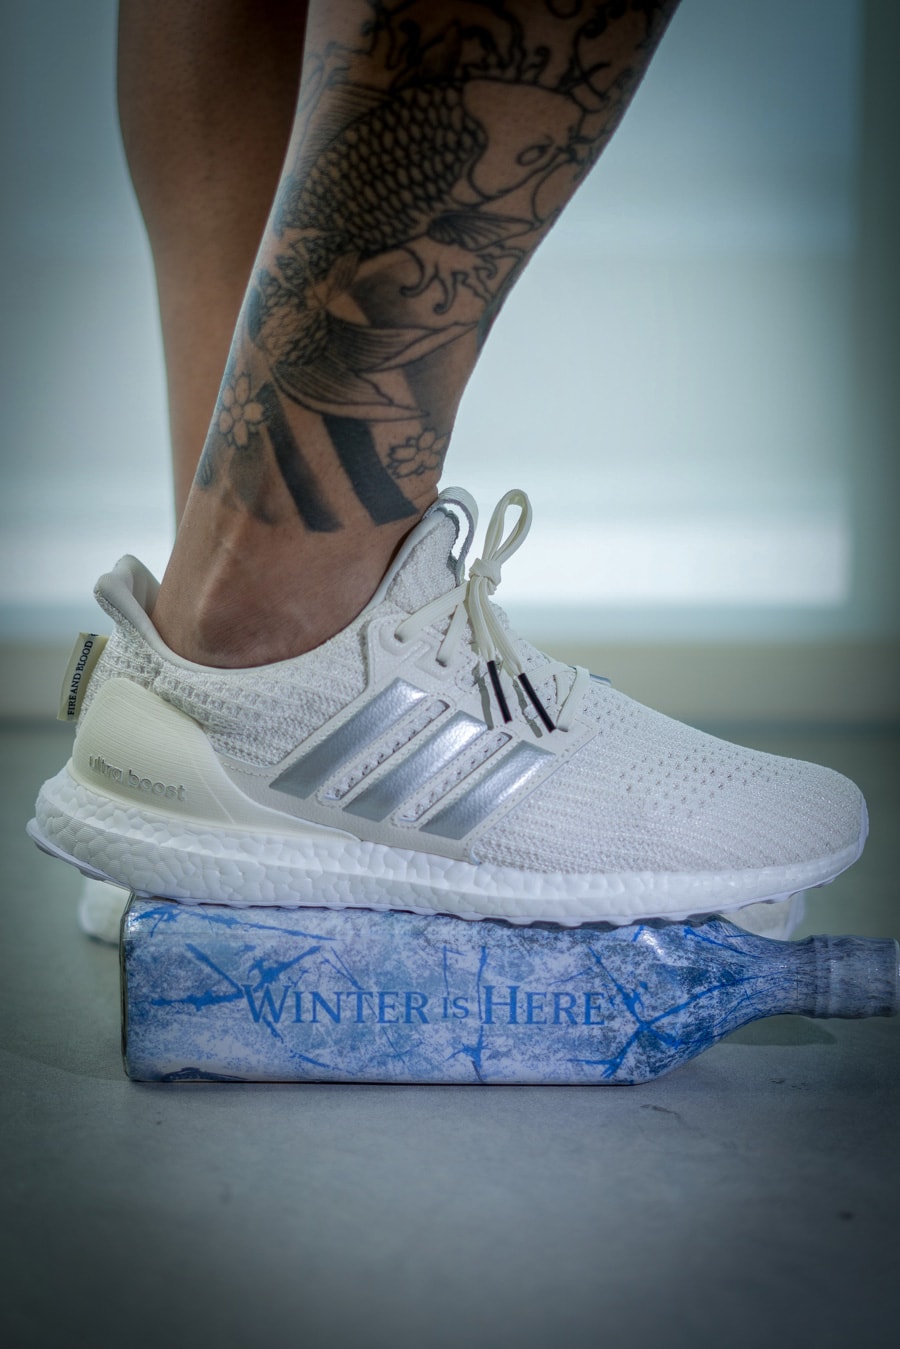 Game of Thrones x adidas UltraBOOST On-Foot